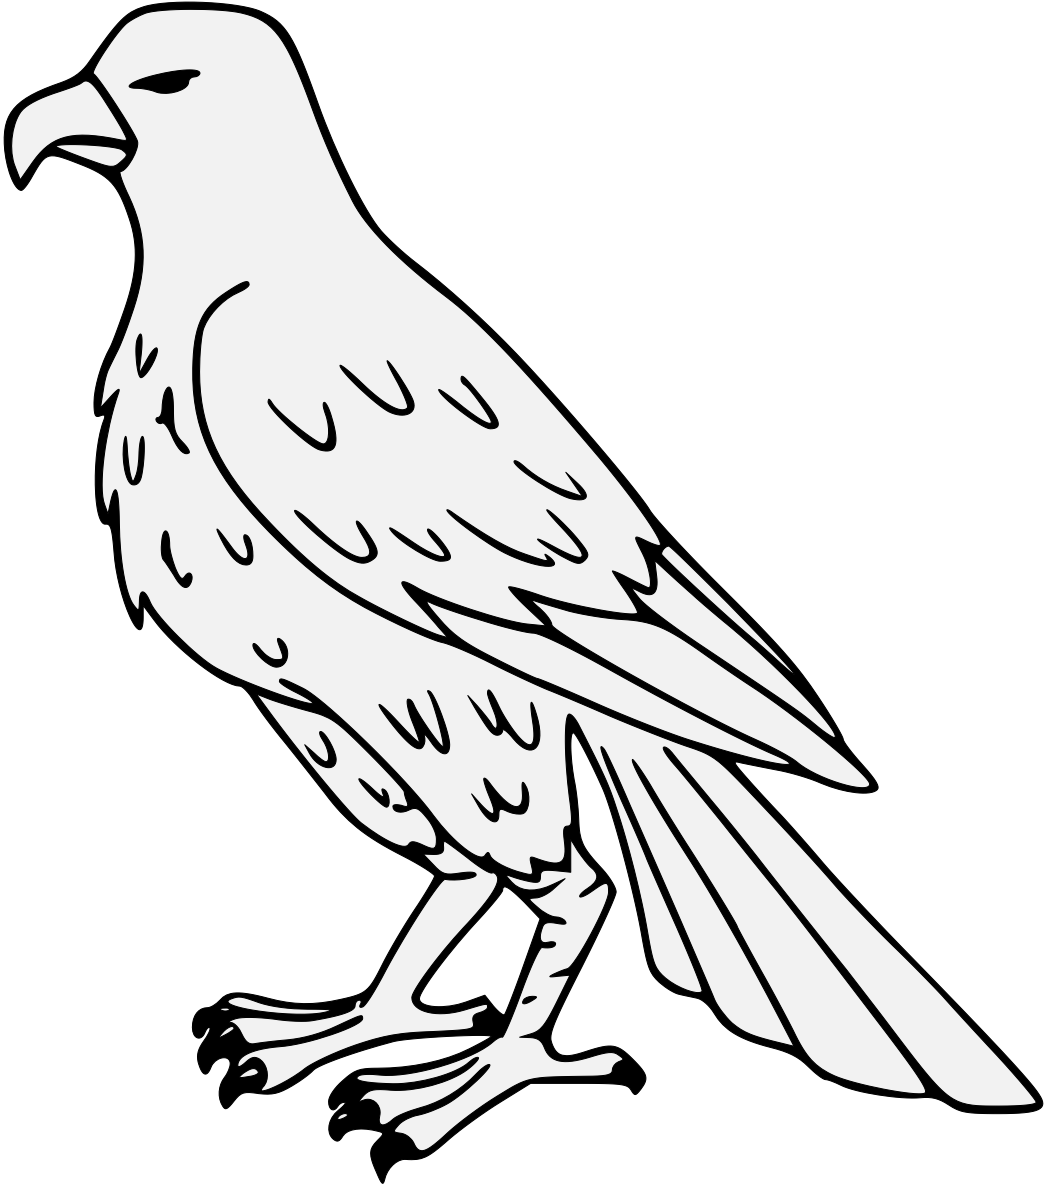 A White Bird With A Black Background